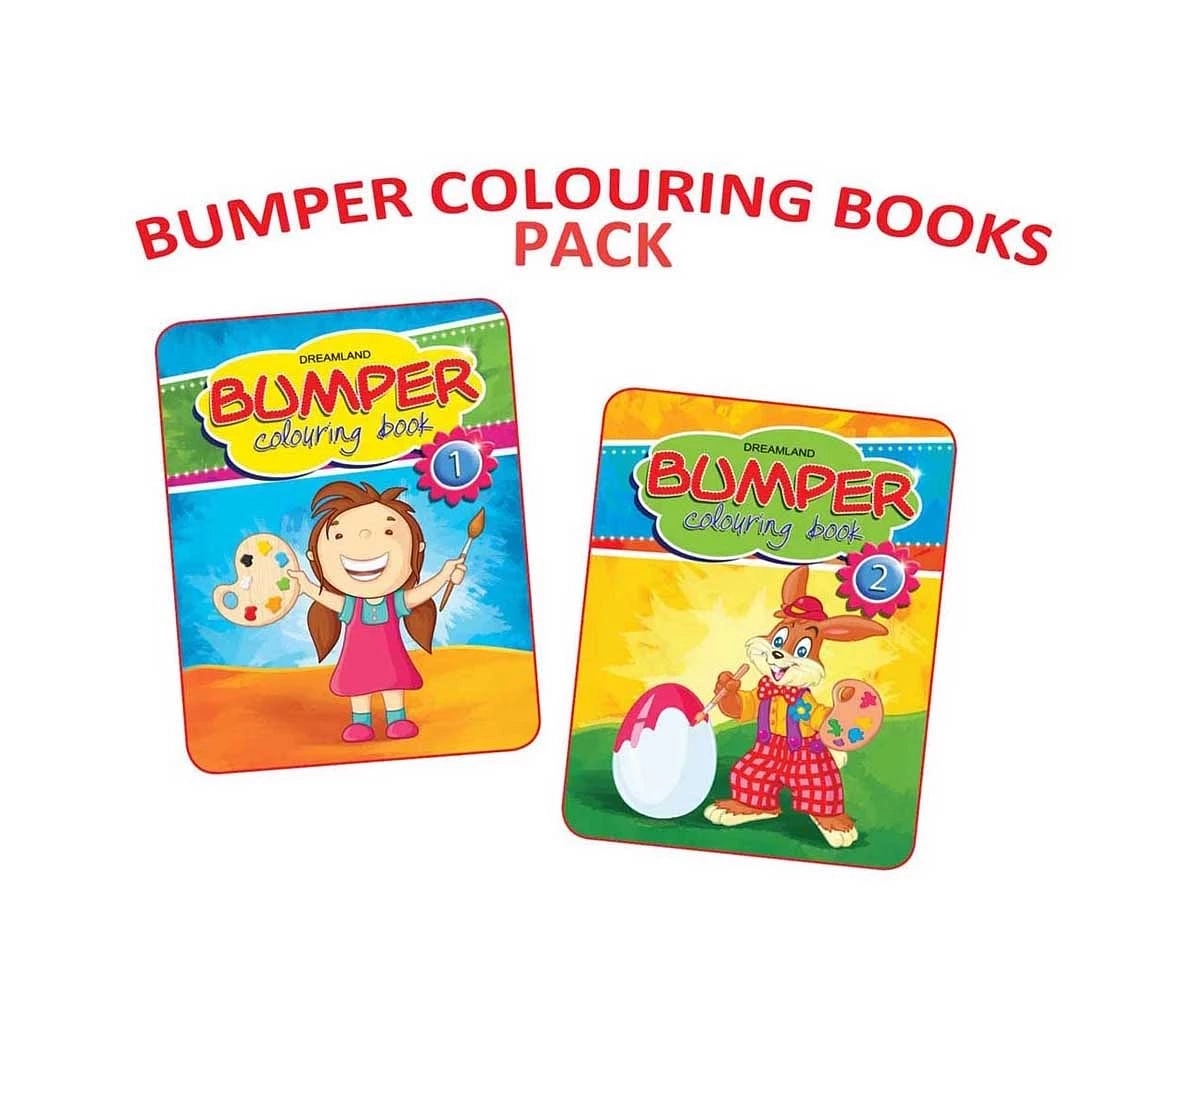 Dreamland Paper Back Bumper Colouring Books Pack of 1 with 2 Titles for kids 3Y+, Multicolour